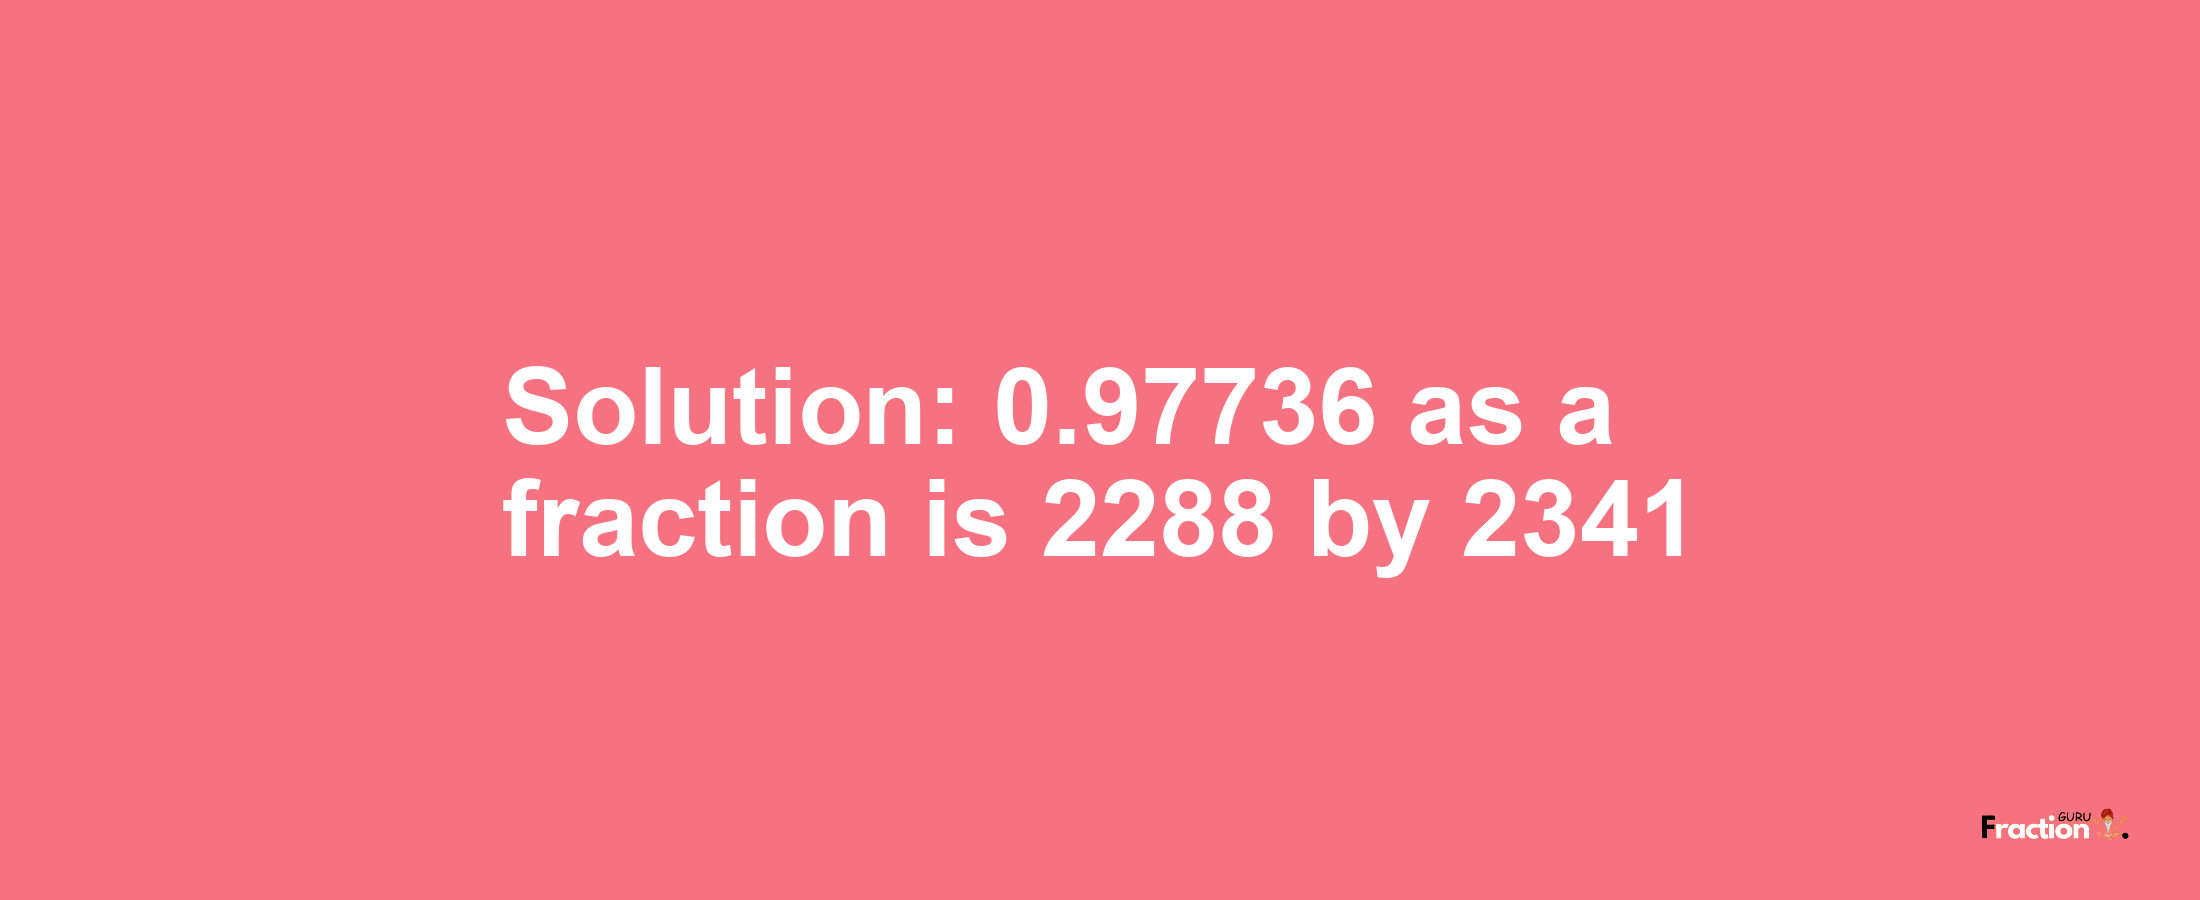 Solution:0.97736 as a fraction is 2288/2341